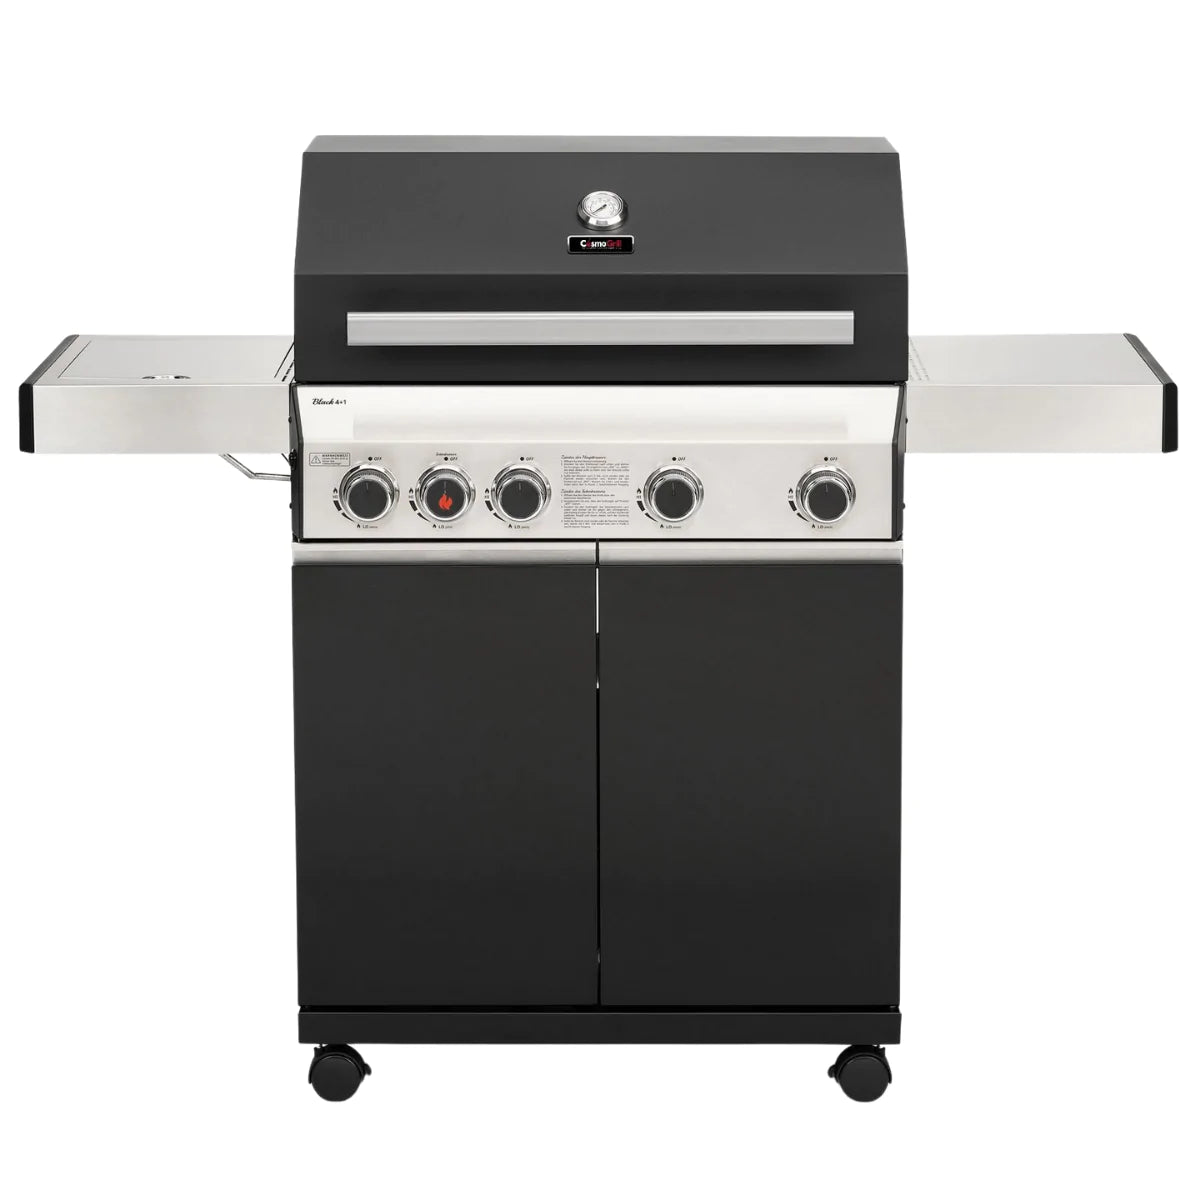 CosmoGrill Premium Black 4+1 Gas Barbecue Front View